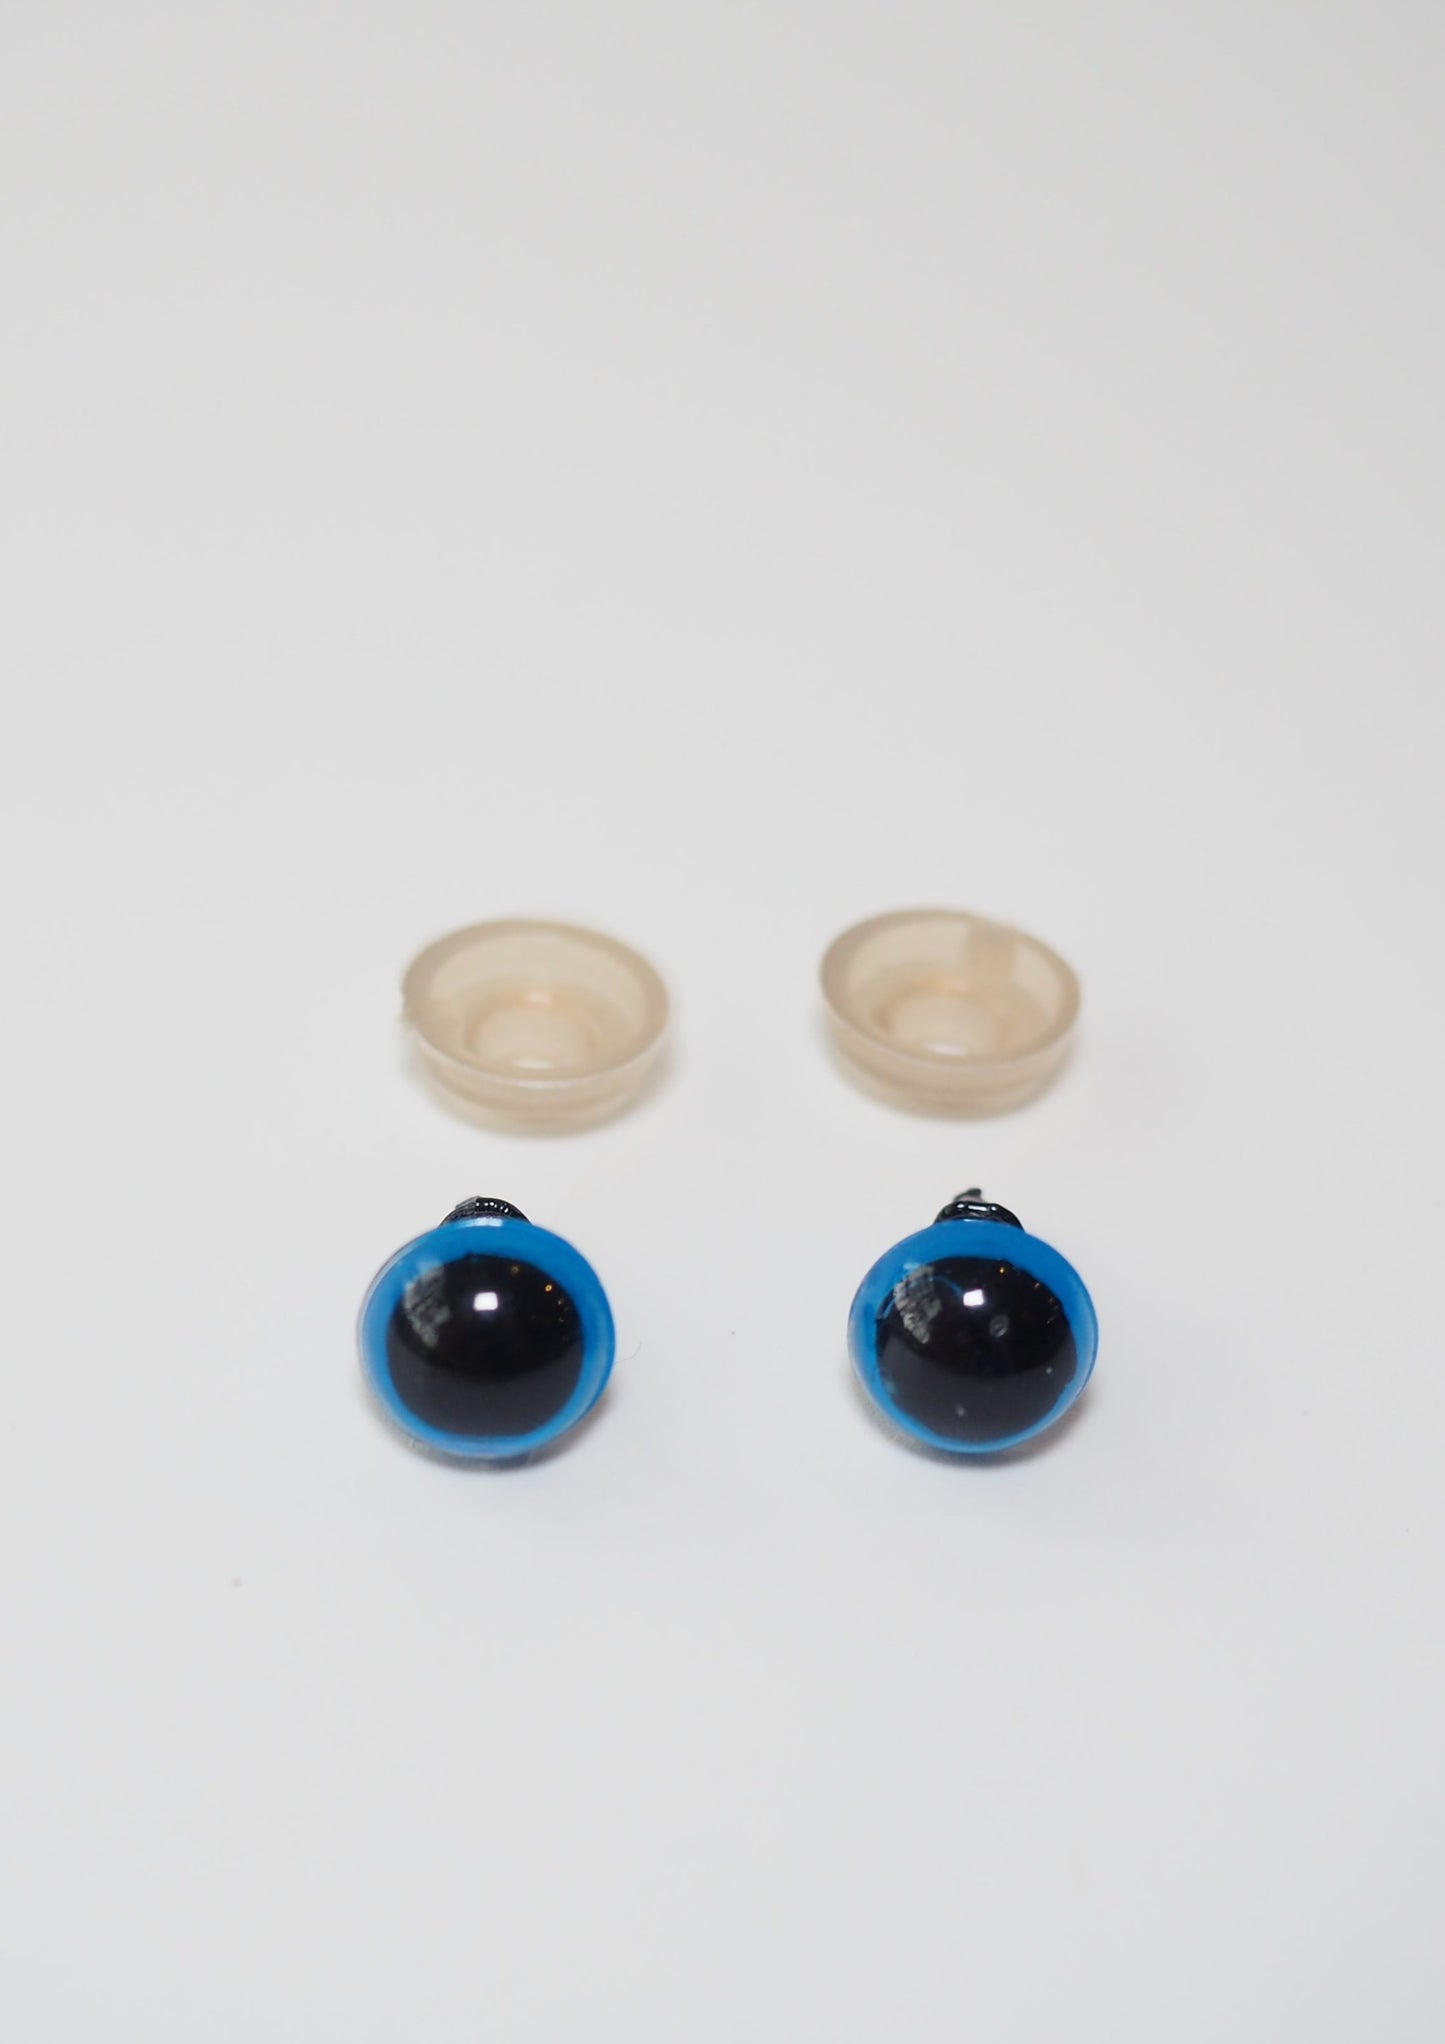 Colorful plastic safety eyes for crafts, toys, and amigurumi. Pack of 2 pairs in varying sizes. Available at Good Grief Toronto